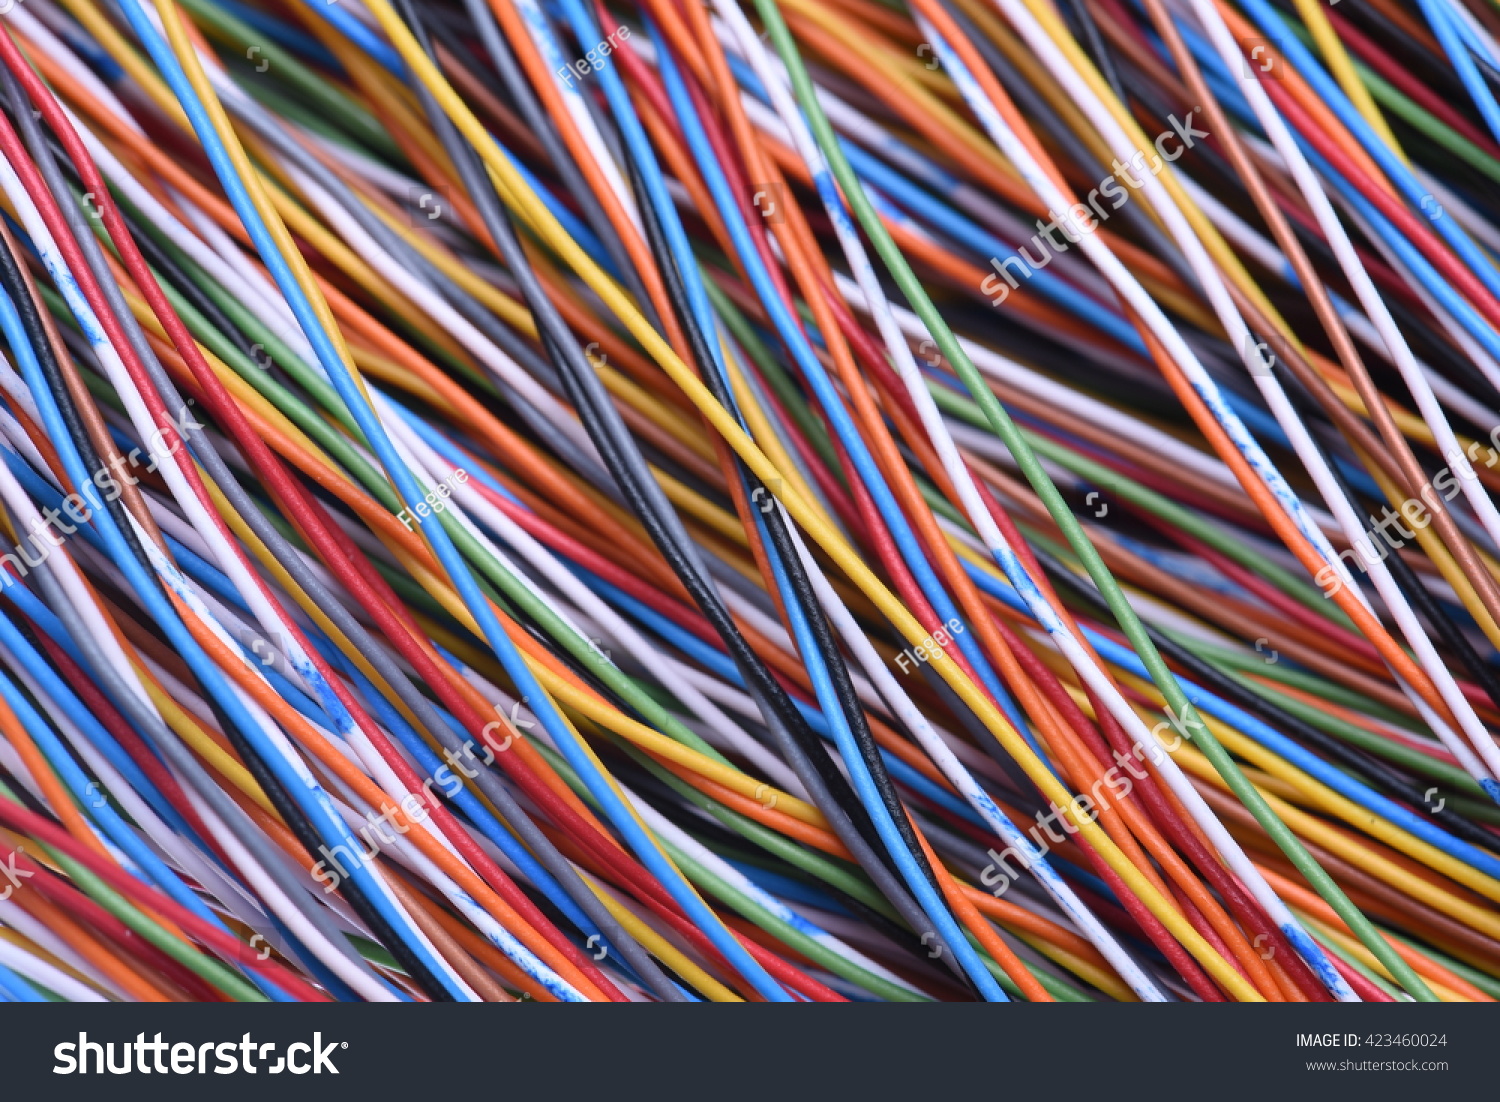 Cables and wires of telecomunication and computer systems #423460024